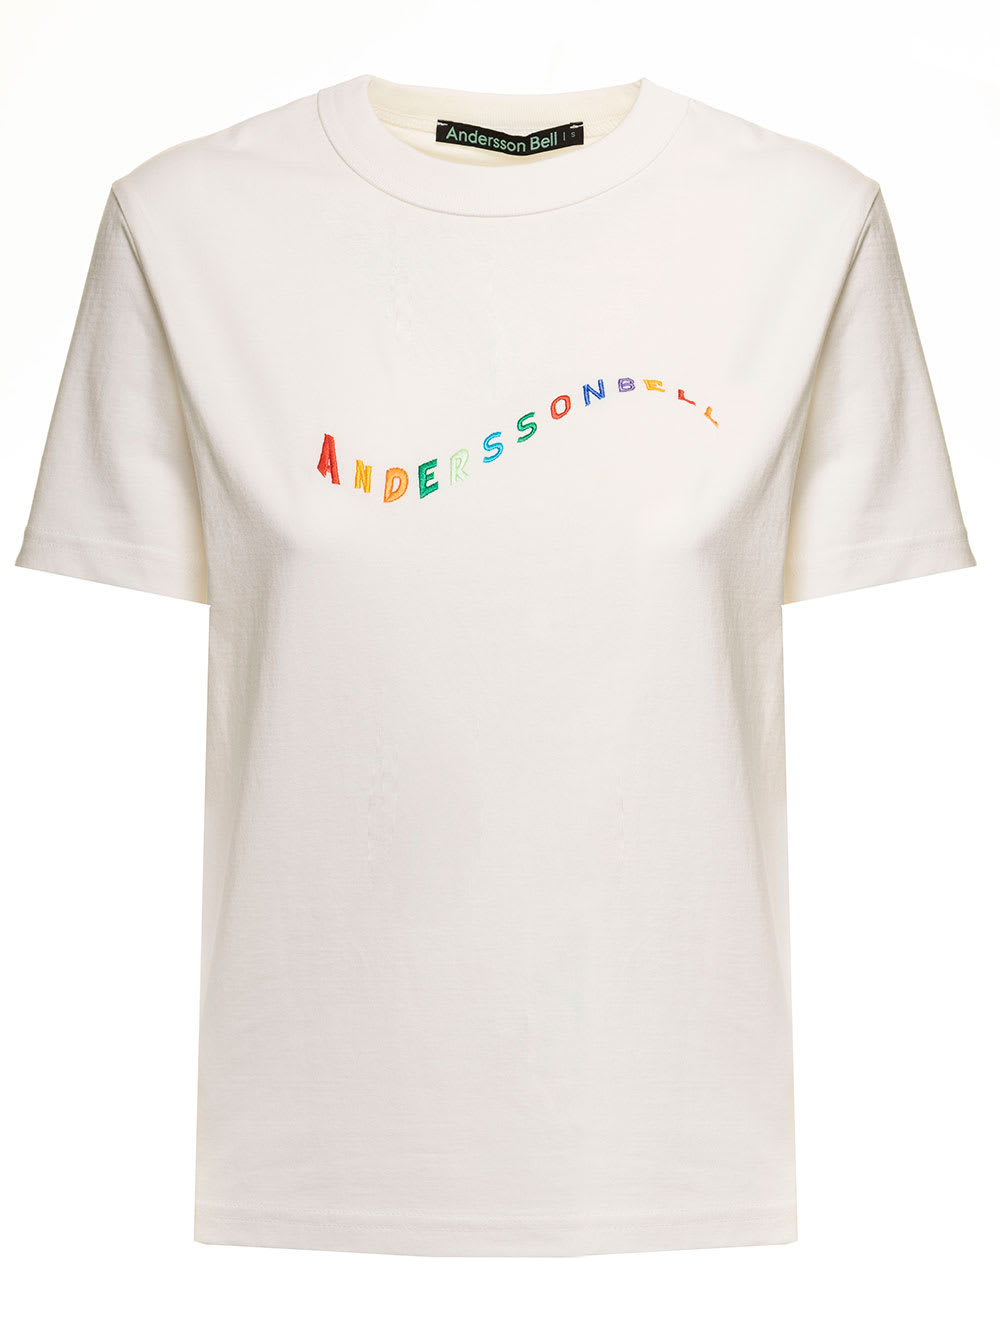 Andersson Bell Woman White Cotton T-shirt With Print